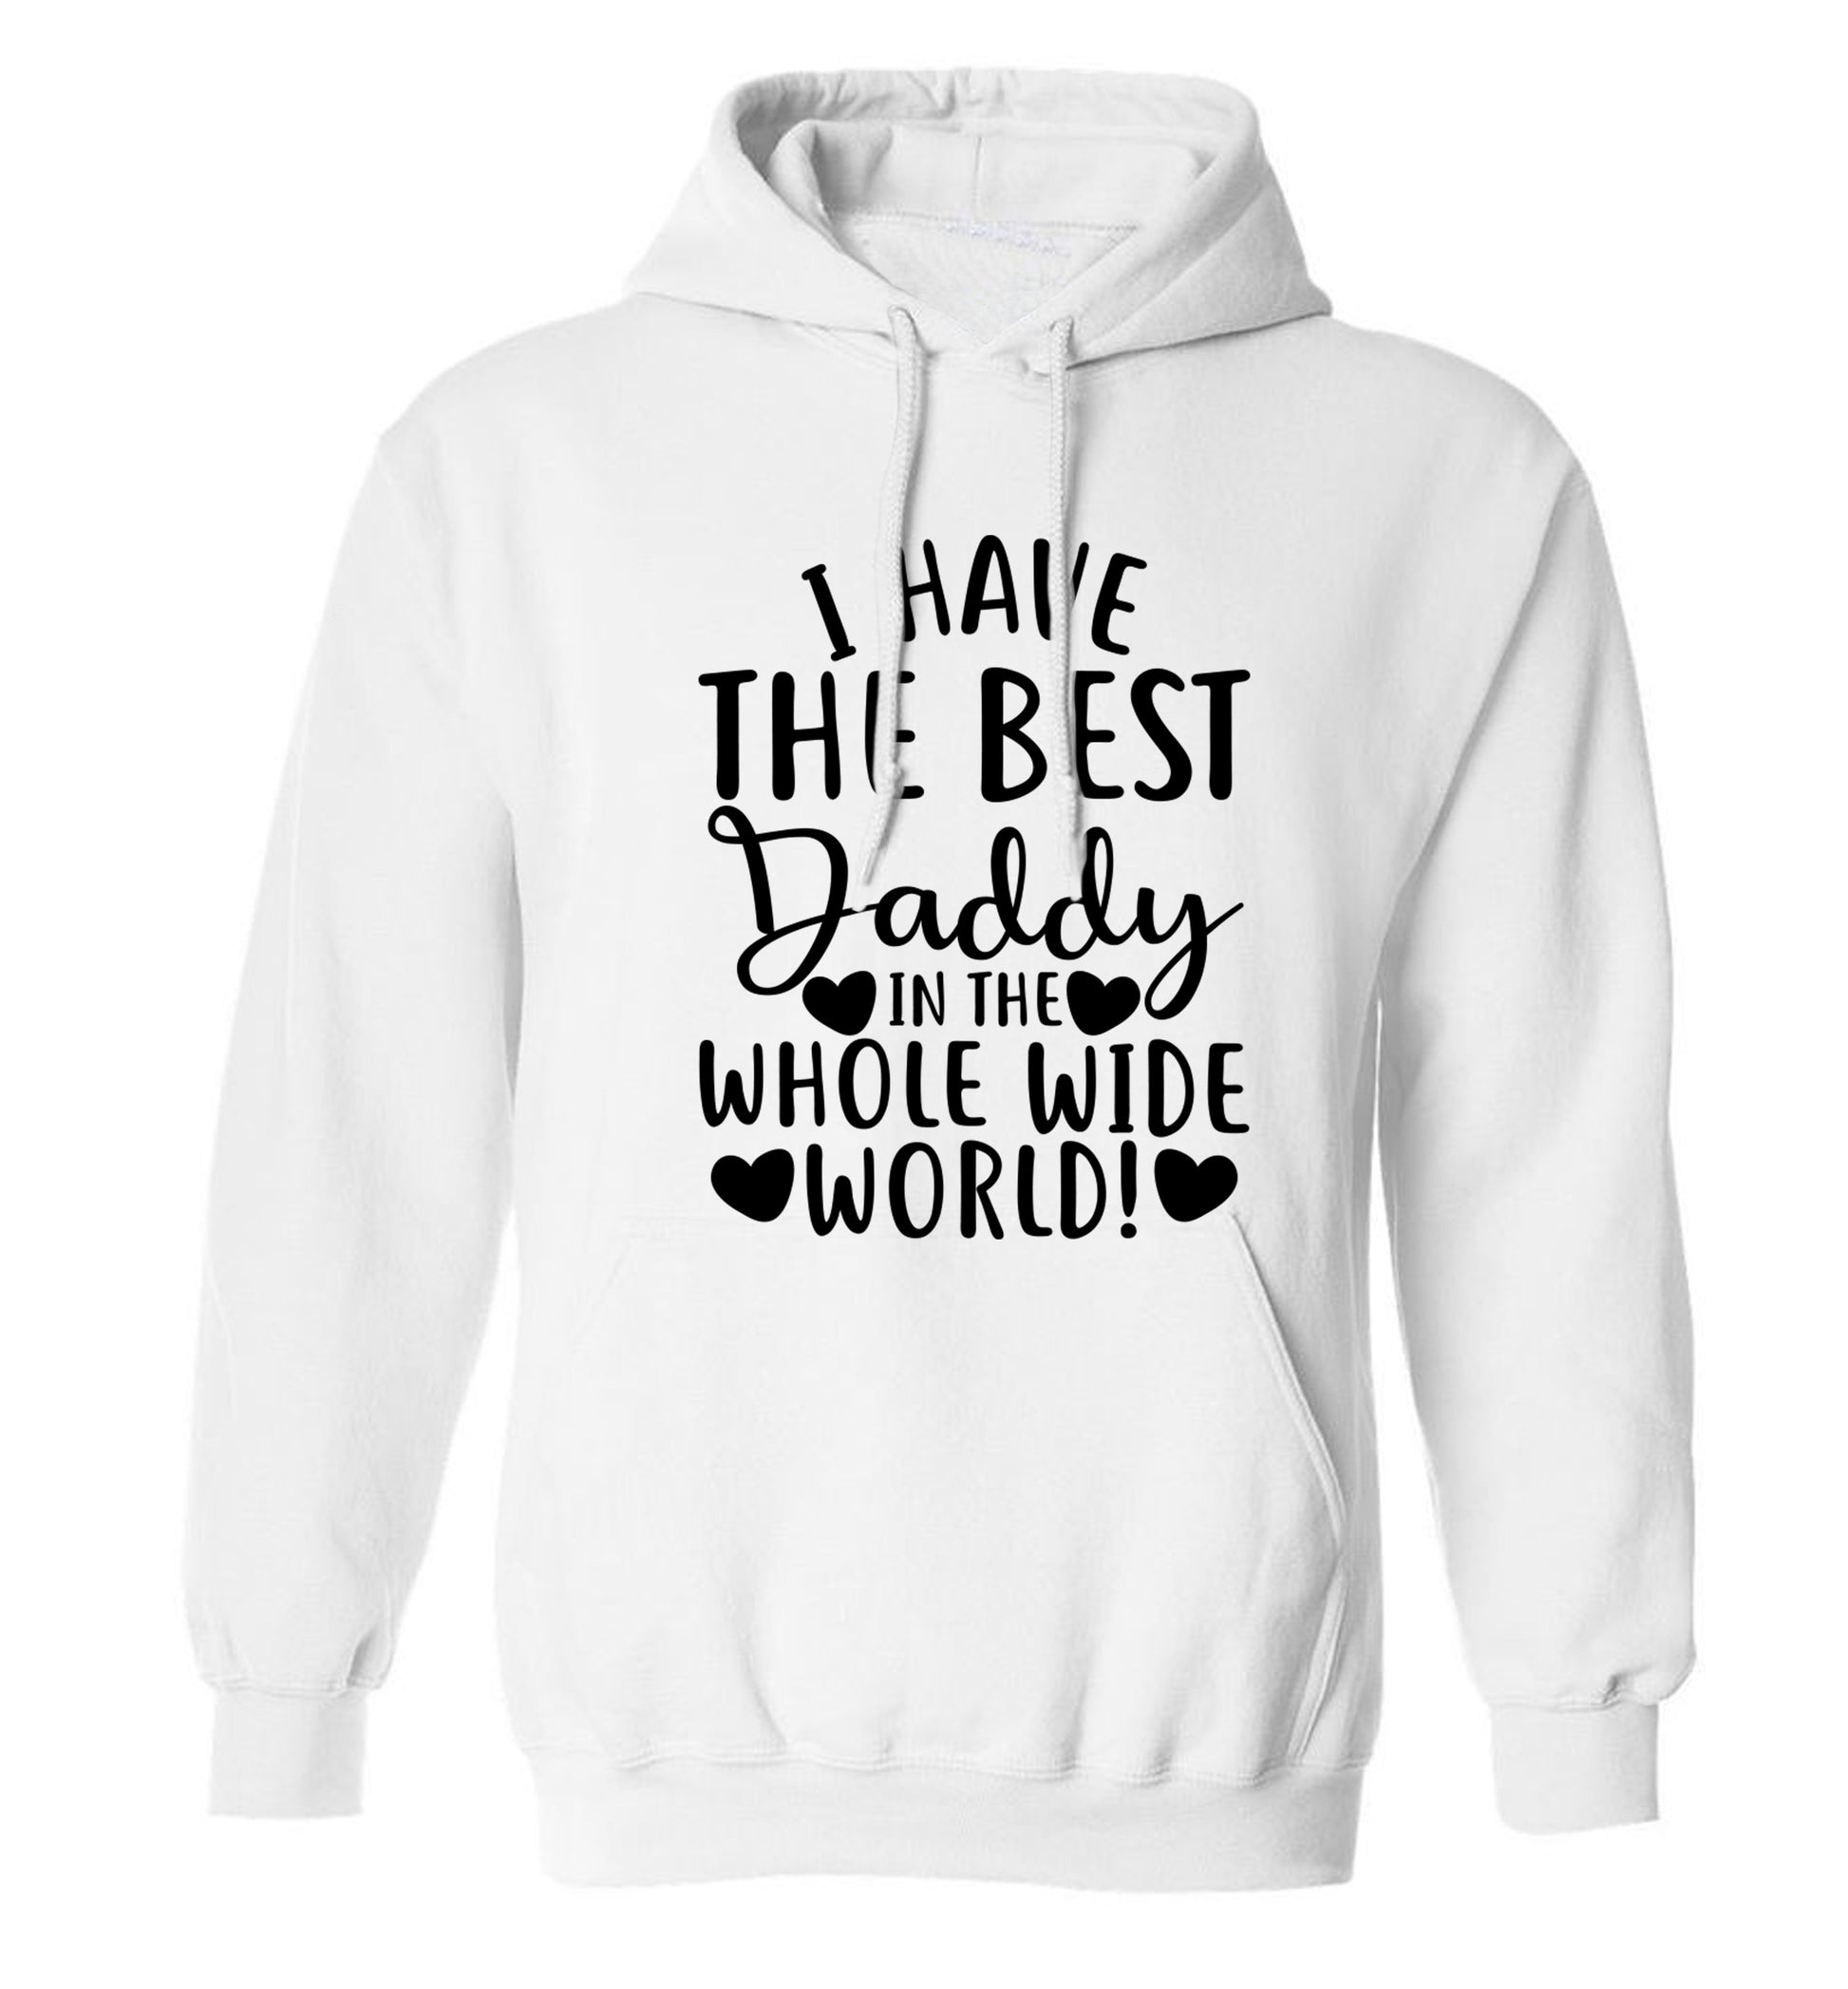 I have the best daddy in the whole wide world adults unisex white hoodie 2XL